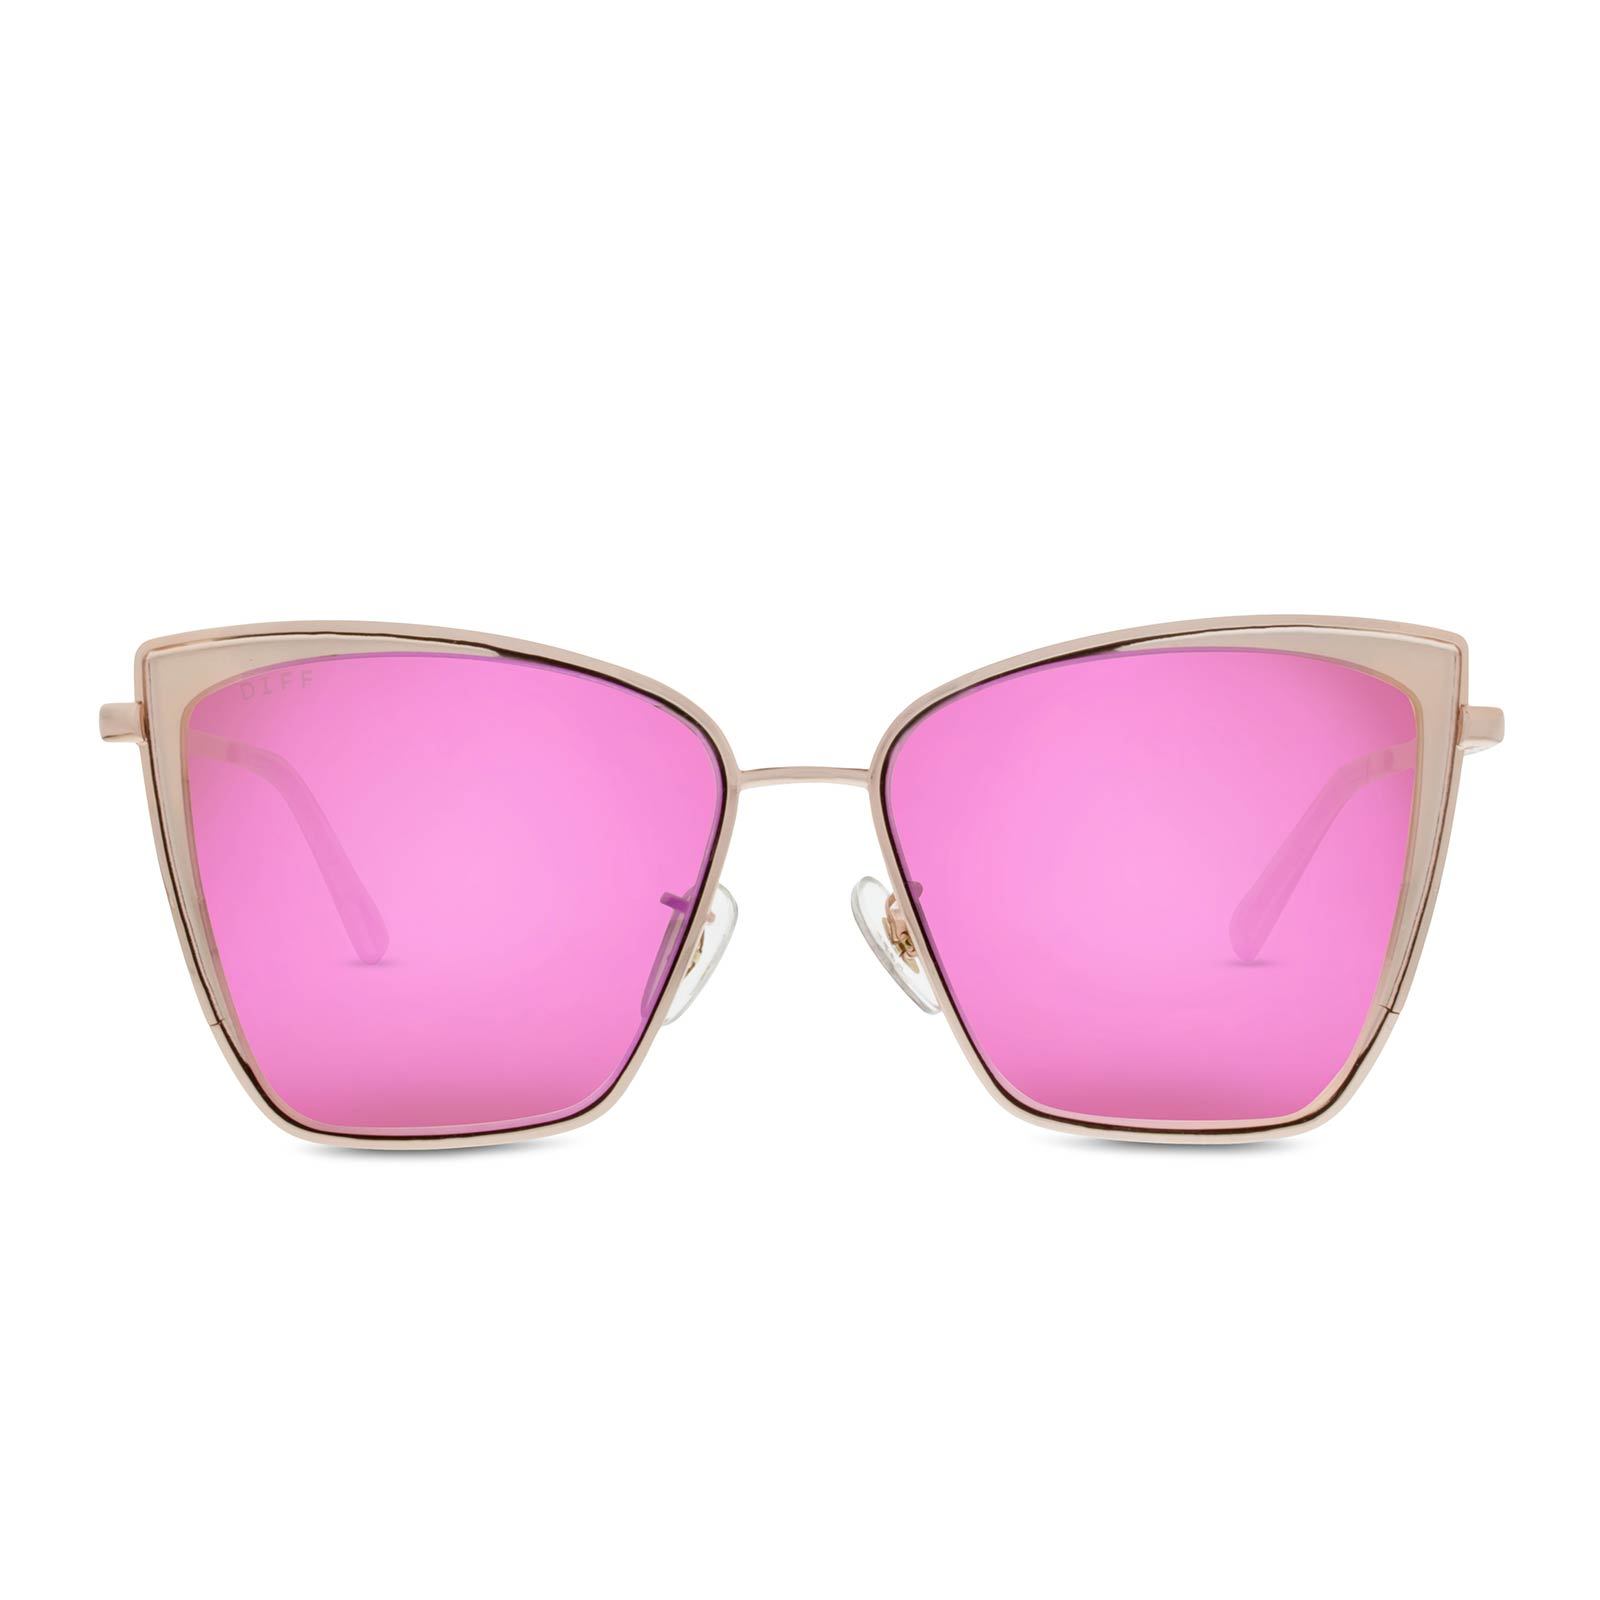 Pink and gold cat eye-ish sunglasses